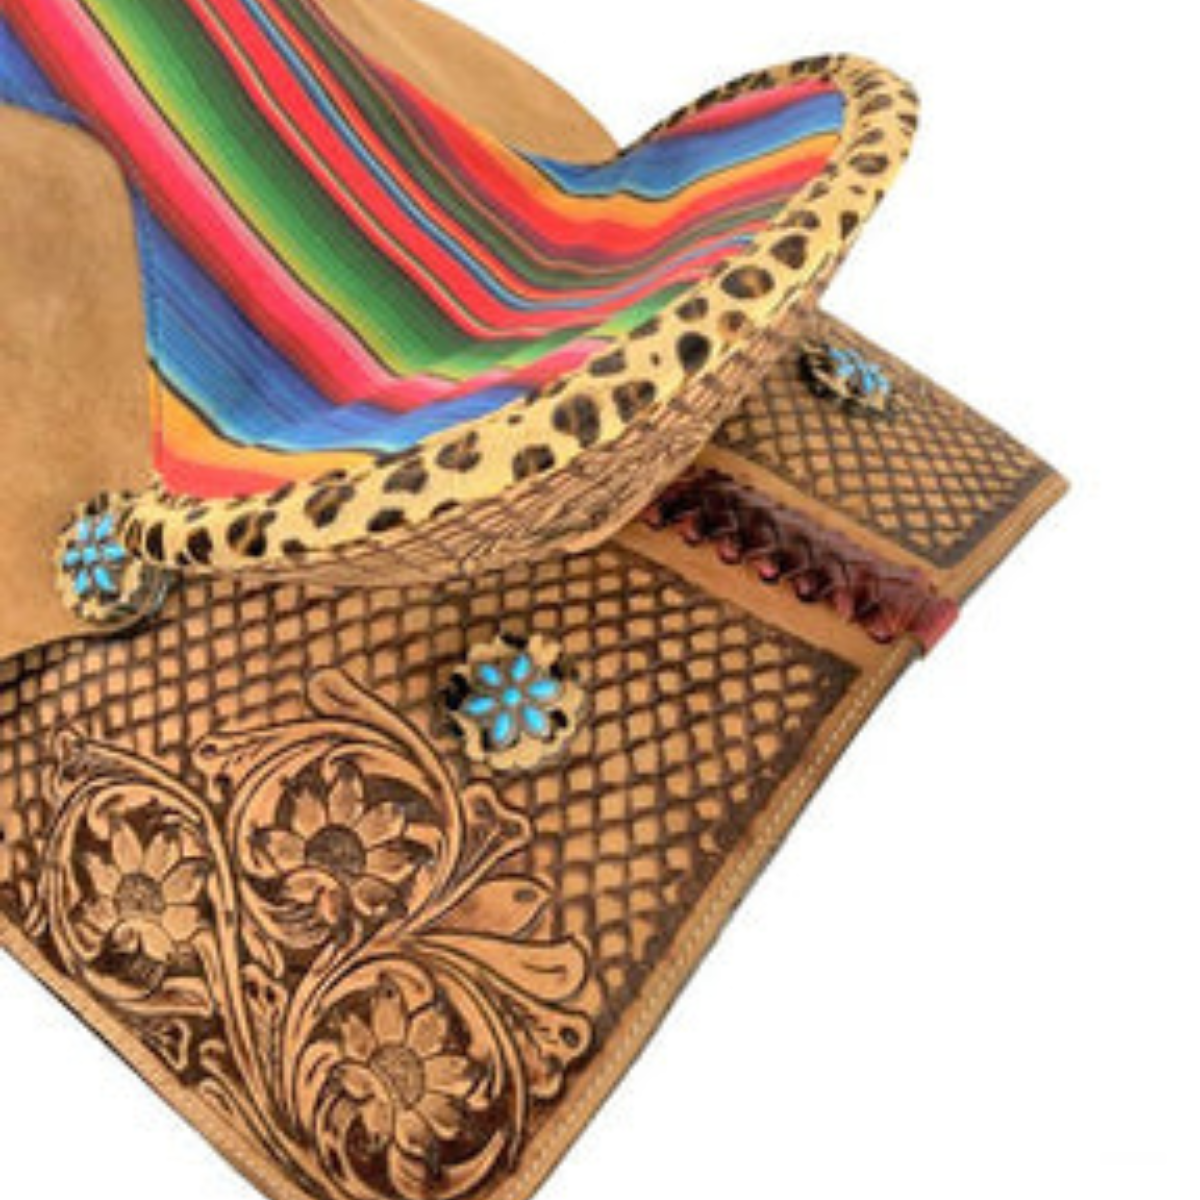 15" DOUBLE T  BARREL STYLE WESTERN SADDLE WITH SERAPE CHEETAH ACCENTS - Double T Saddles